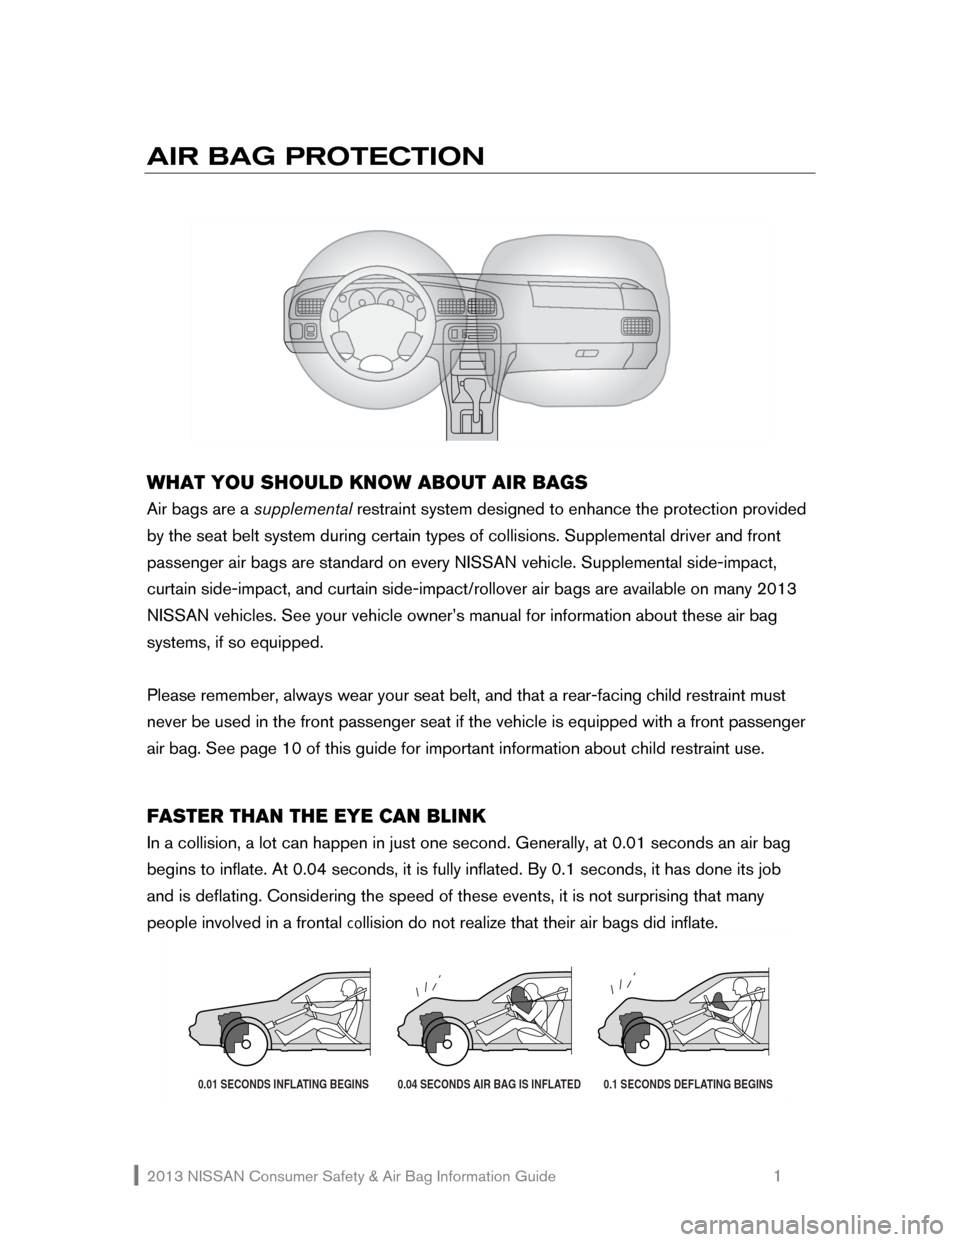 NISSAN MURANO 2013 2.G Consumer Safety Air Bag Information Guide 2013 NISSAN Consumer Safety & Air Bag Information Guide                                                   1 
AIR BAG PROTECTION 
    
 
 
WHAT YOU SHOULD KNOW ABOUT AIR BAGS 
Air bags are a supplement